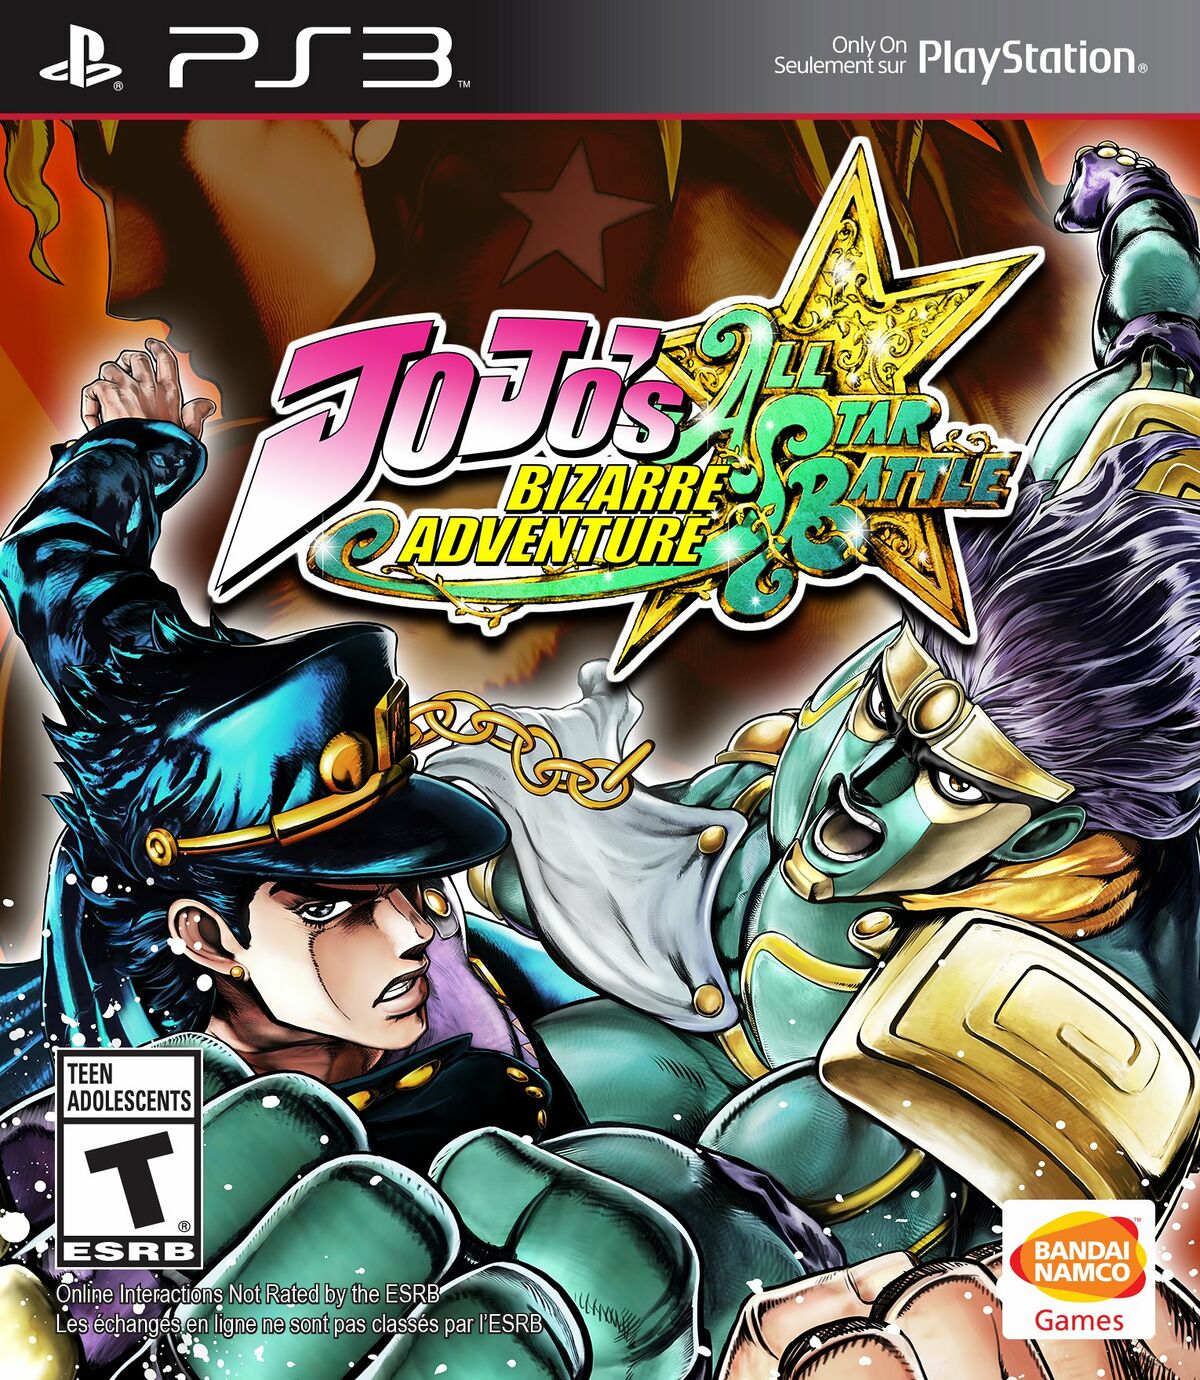 New Players & Beginners Introduction to ASB, JoJo's All Star Battle Wiki